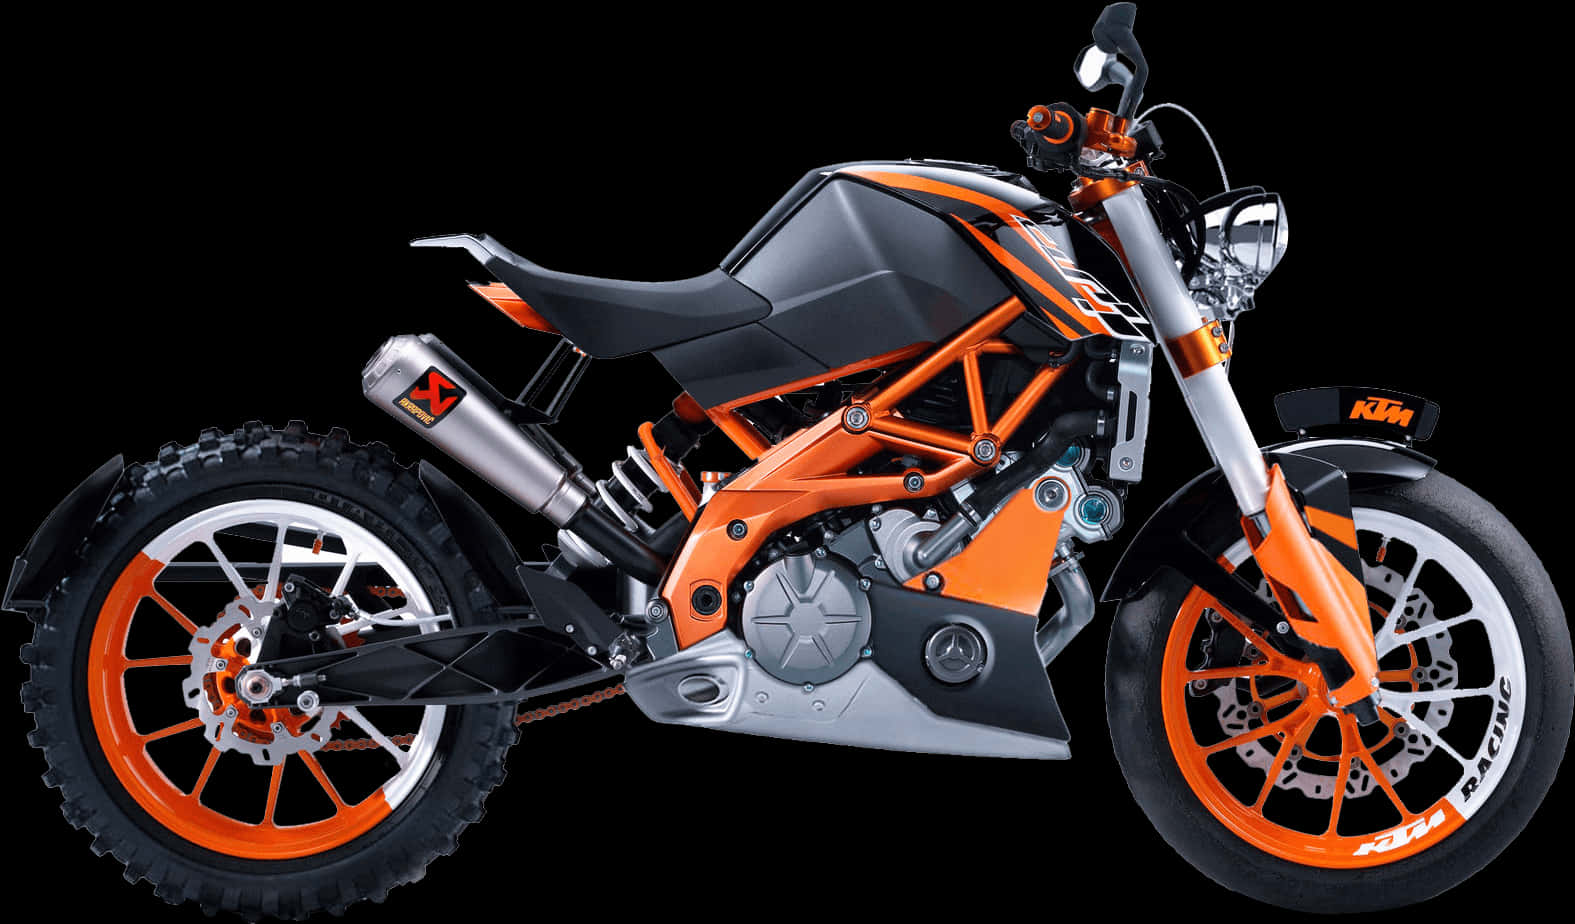 A Motorcycle With Orange And Black Accents